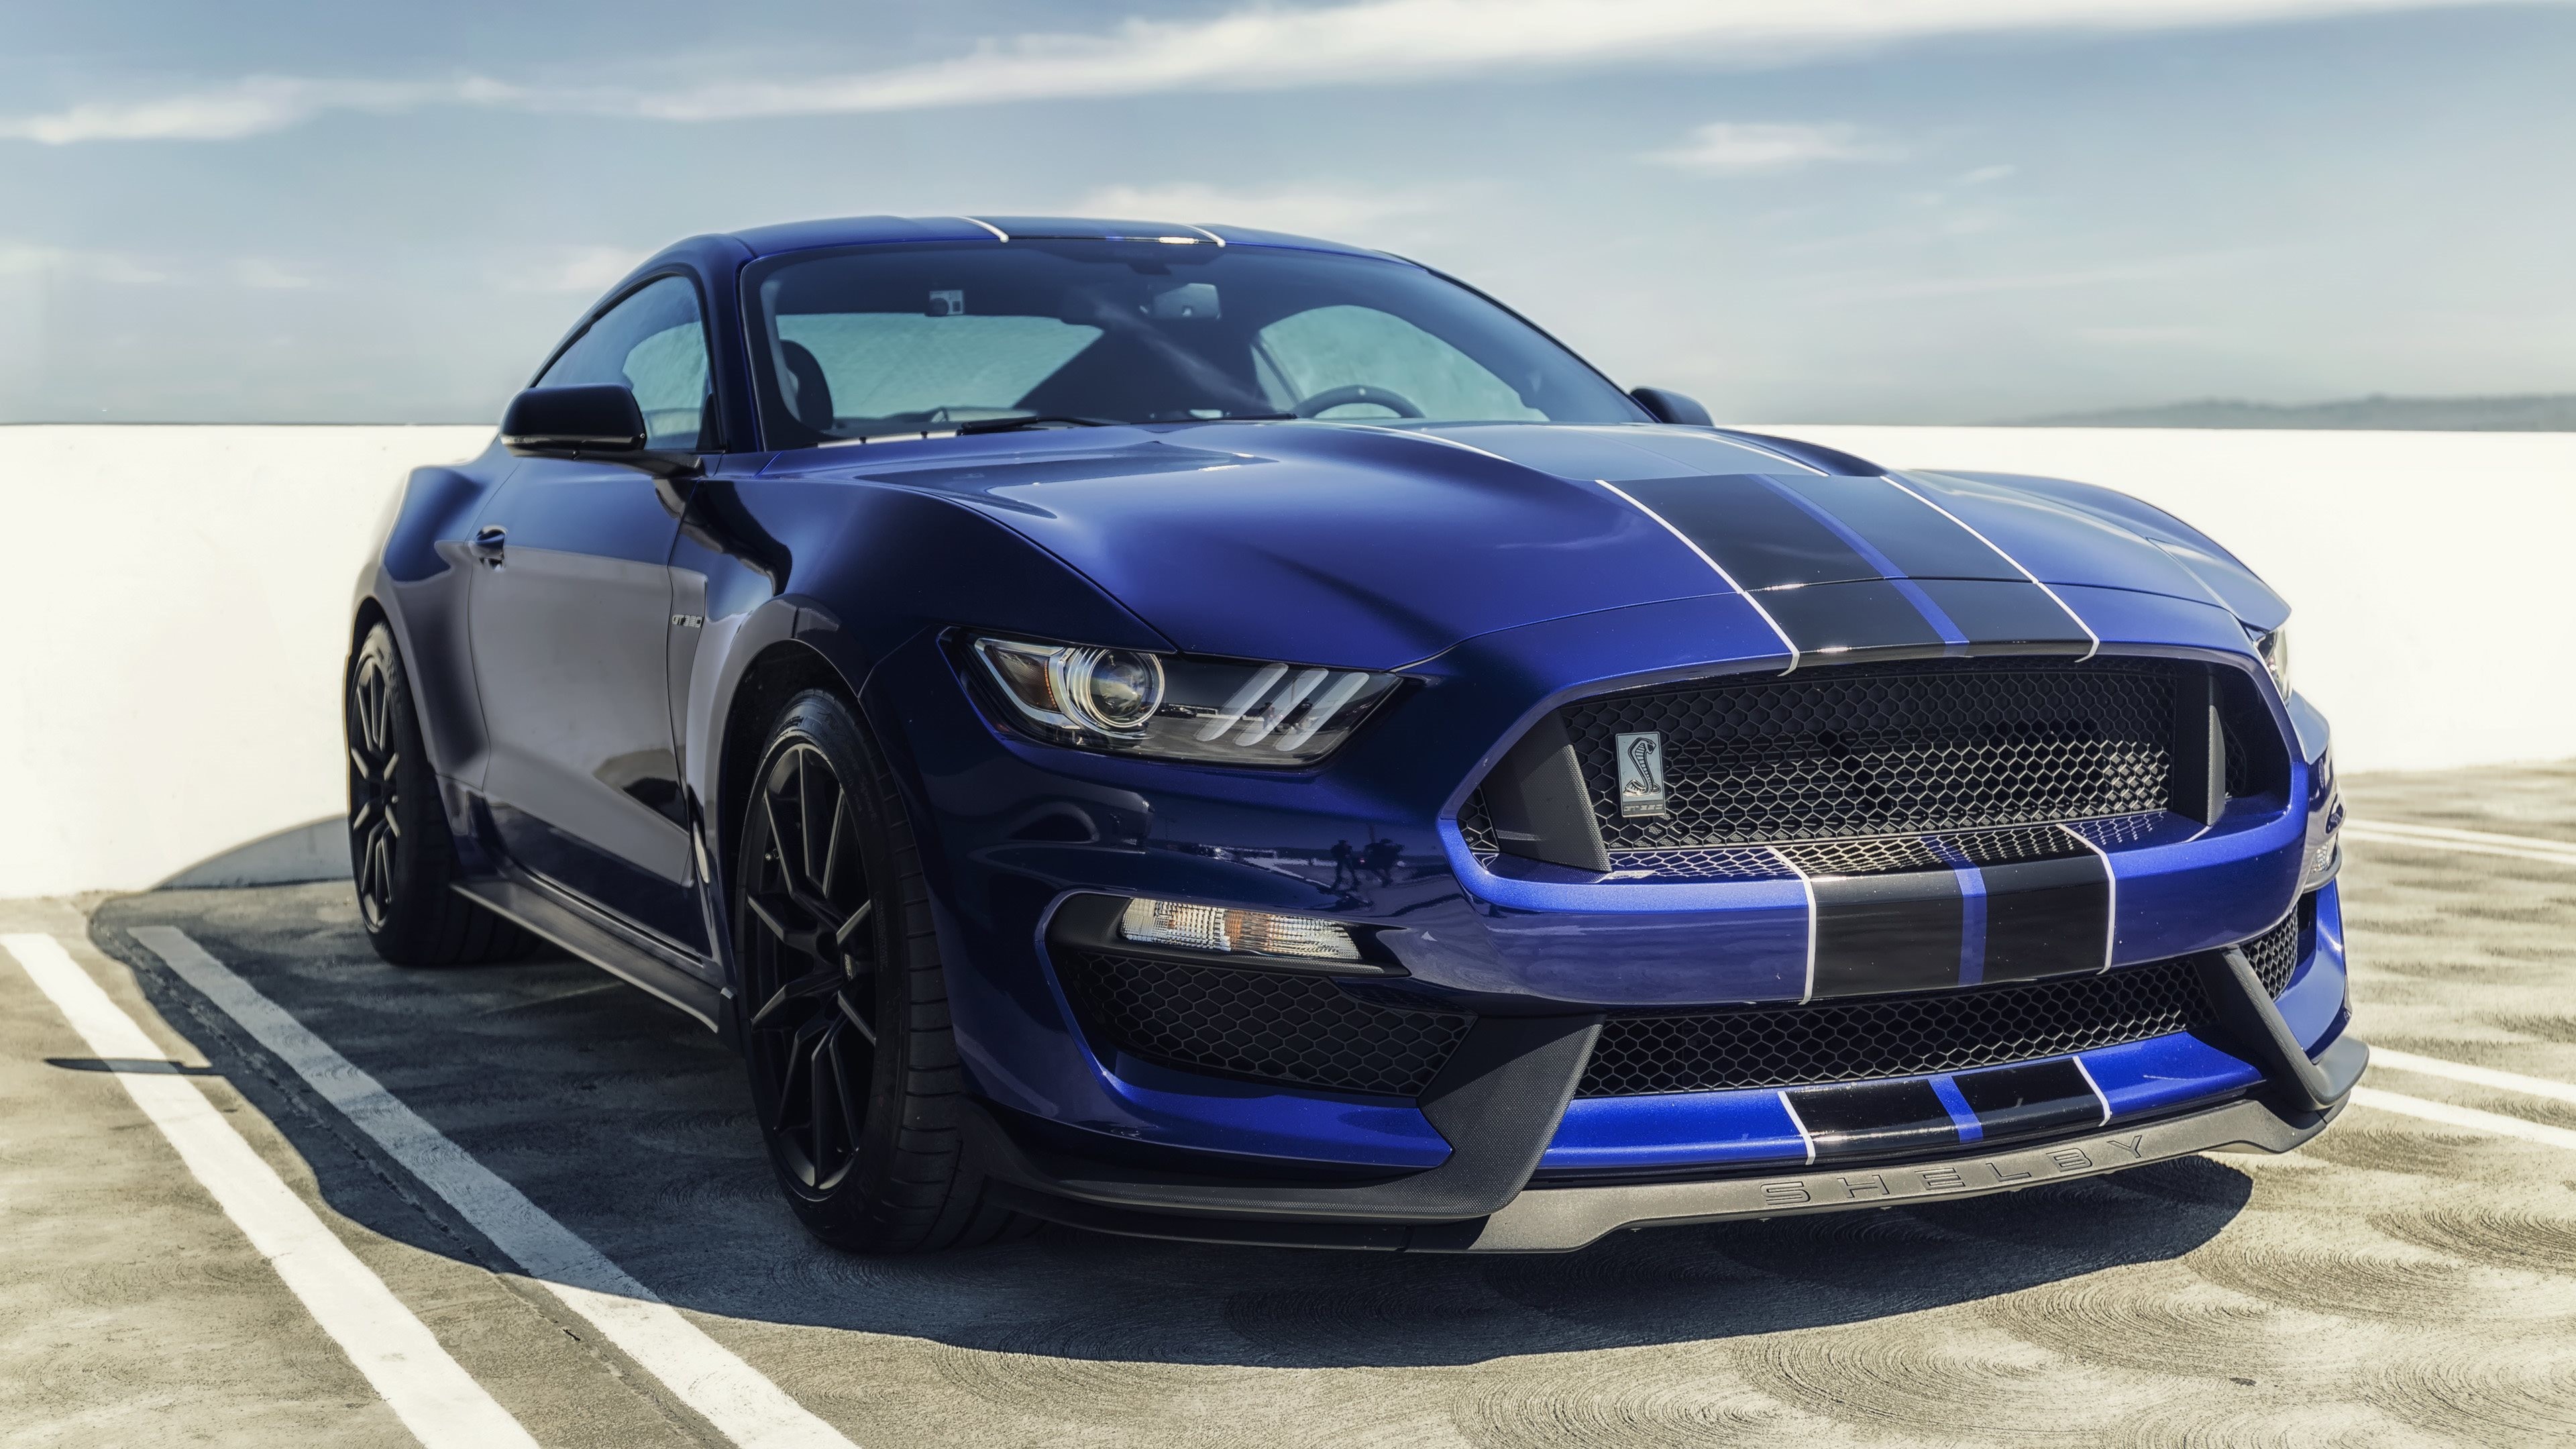 Amazing Ford Mustang Gt Hd Wallpaper Download